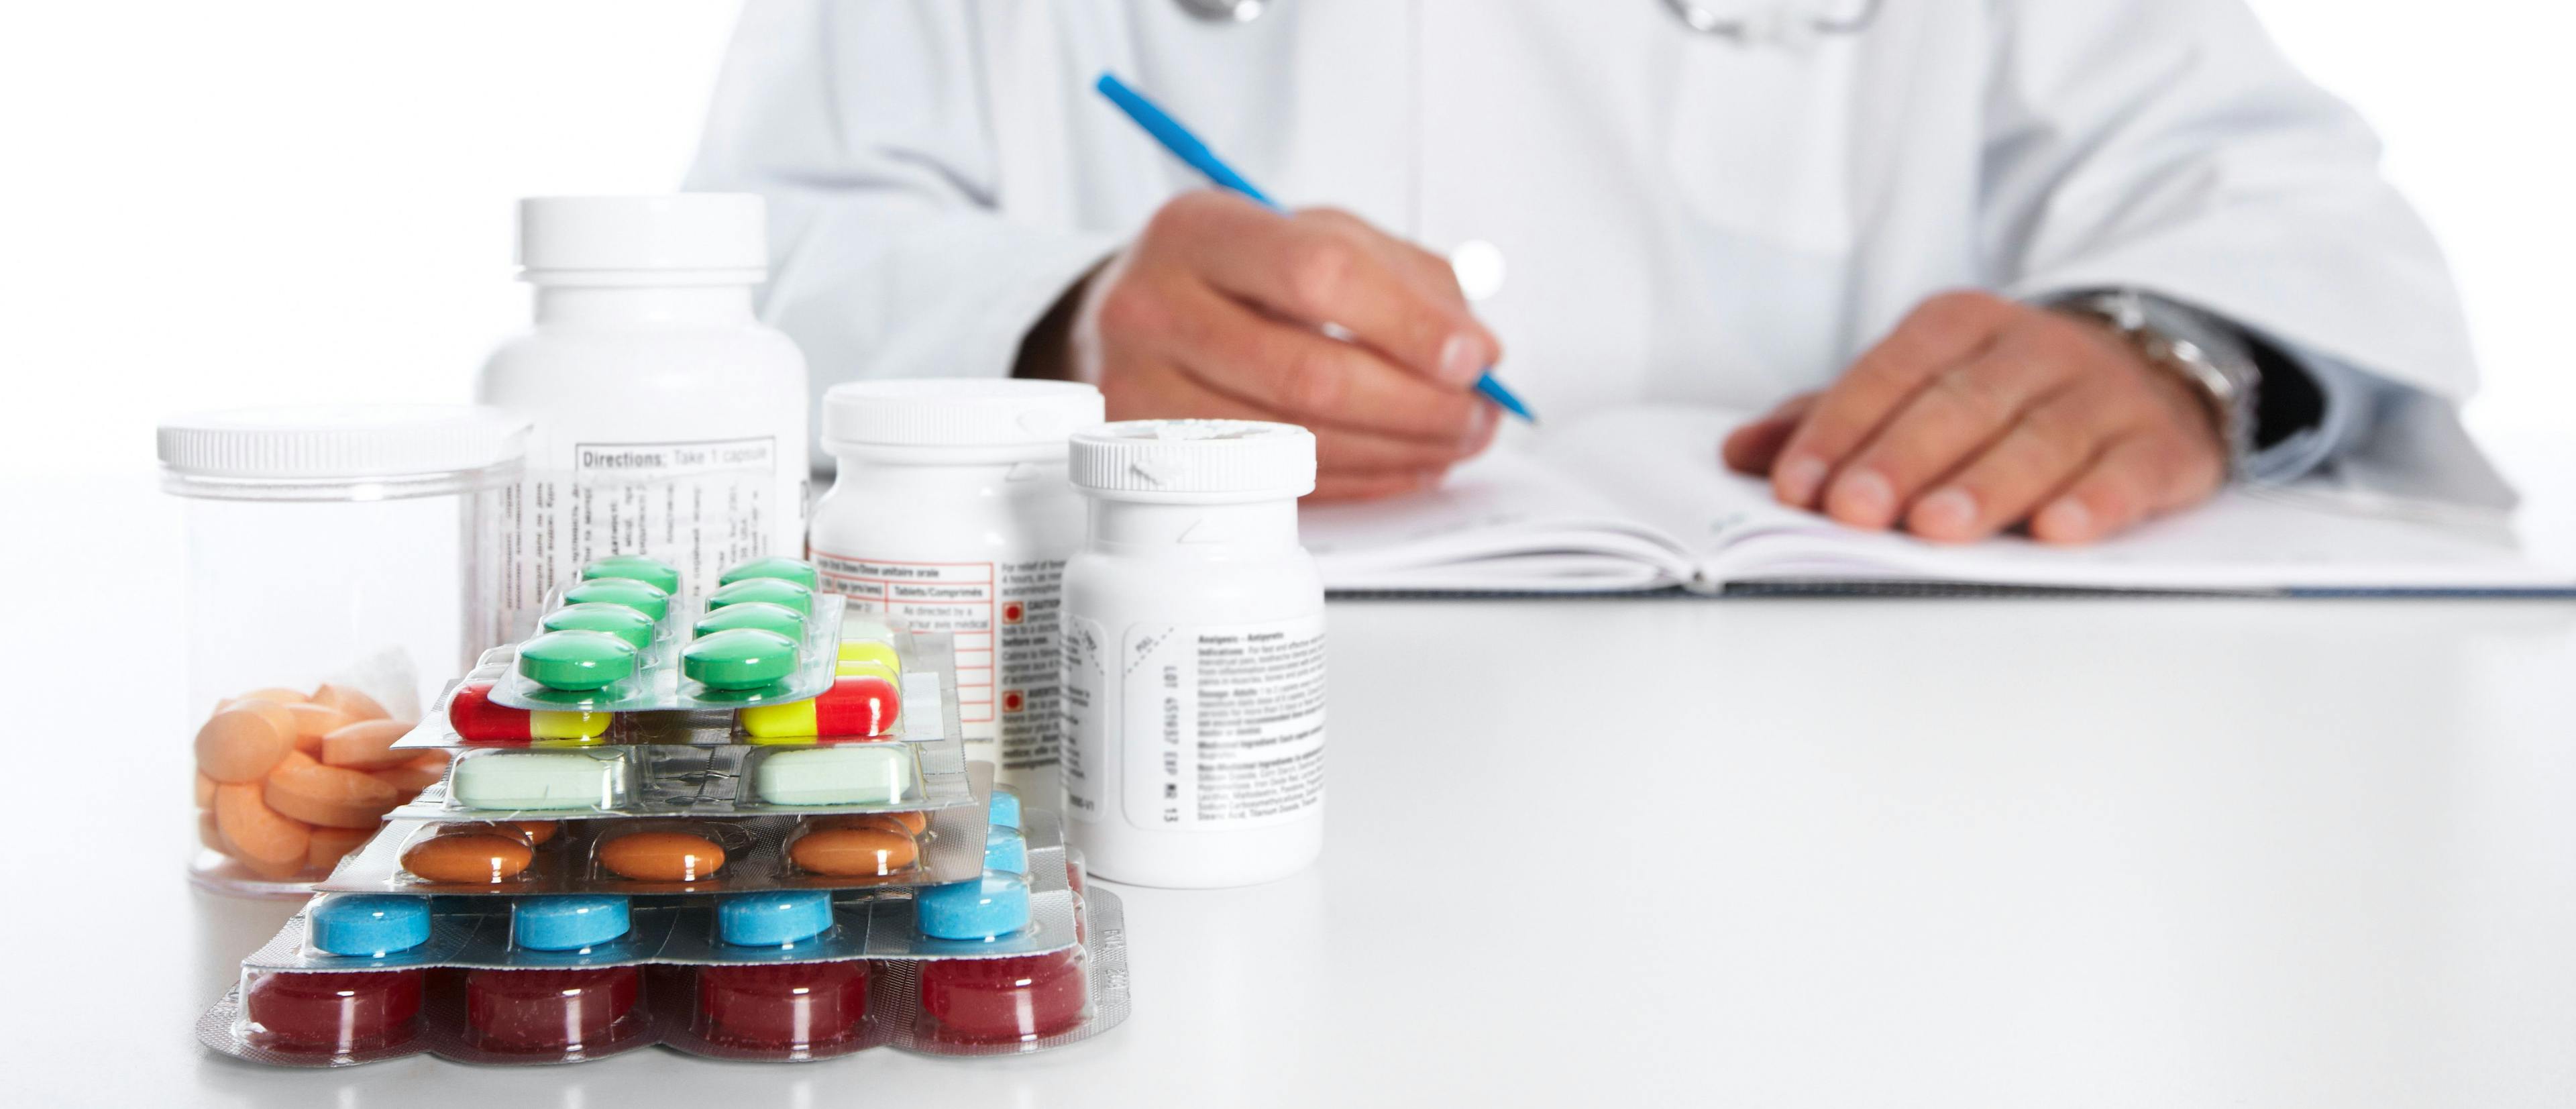 Safe Practices for Error-Prone Medications